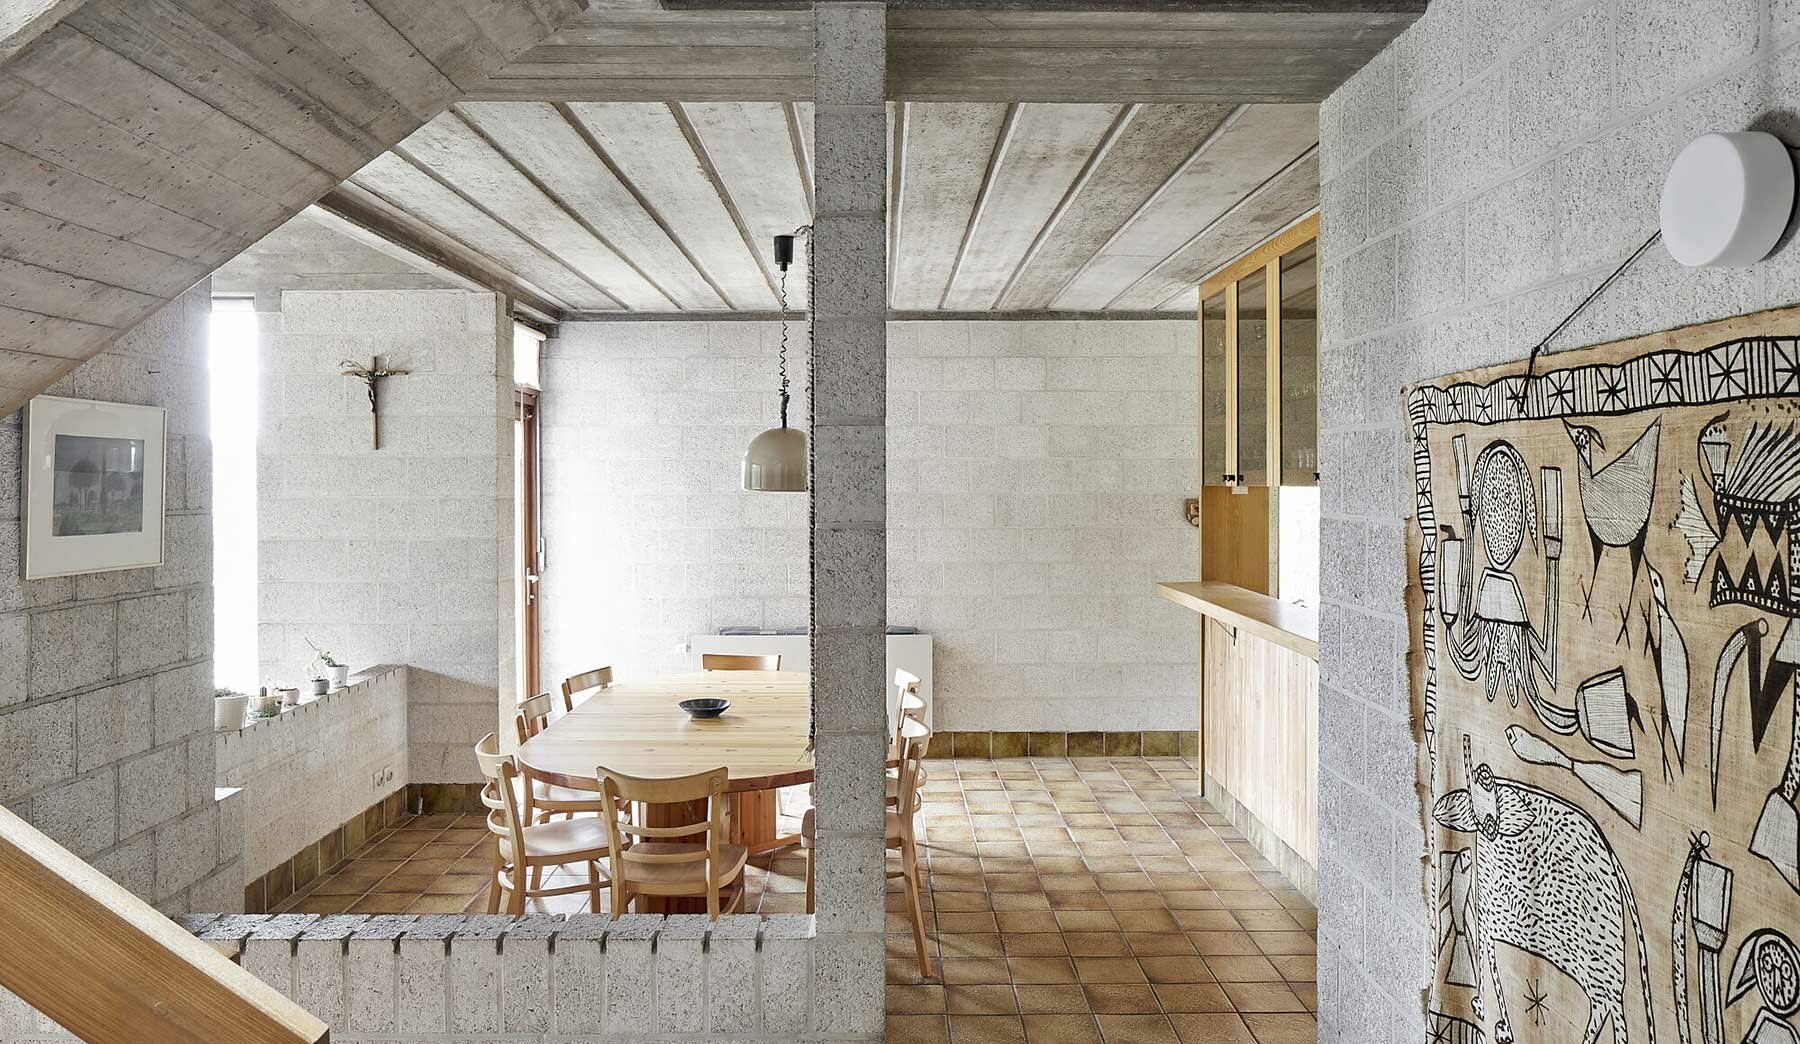 glimpse the brutalist interiors of a 1970s-built home in rural belgium